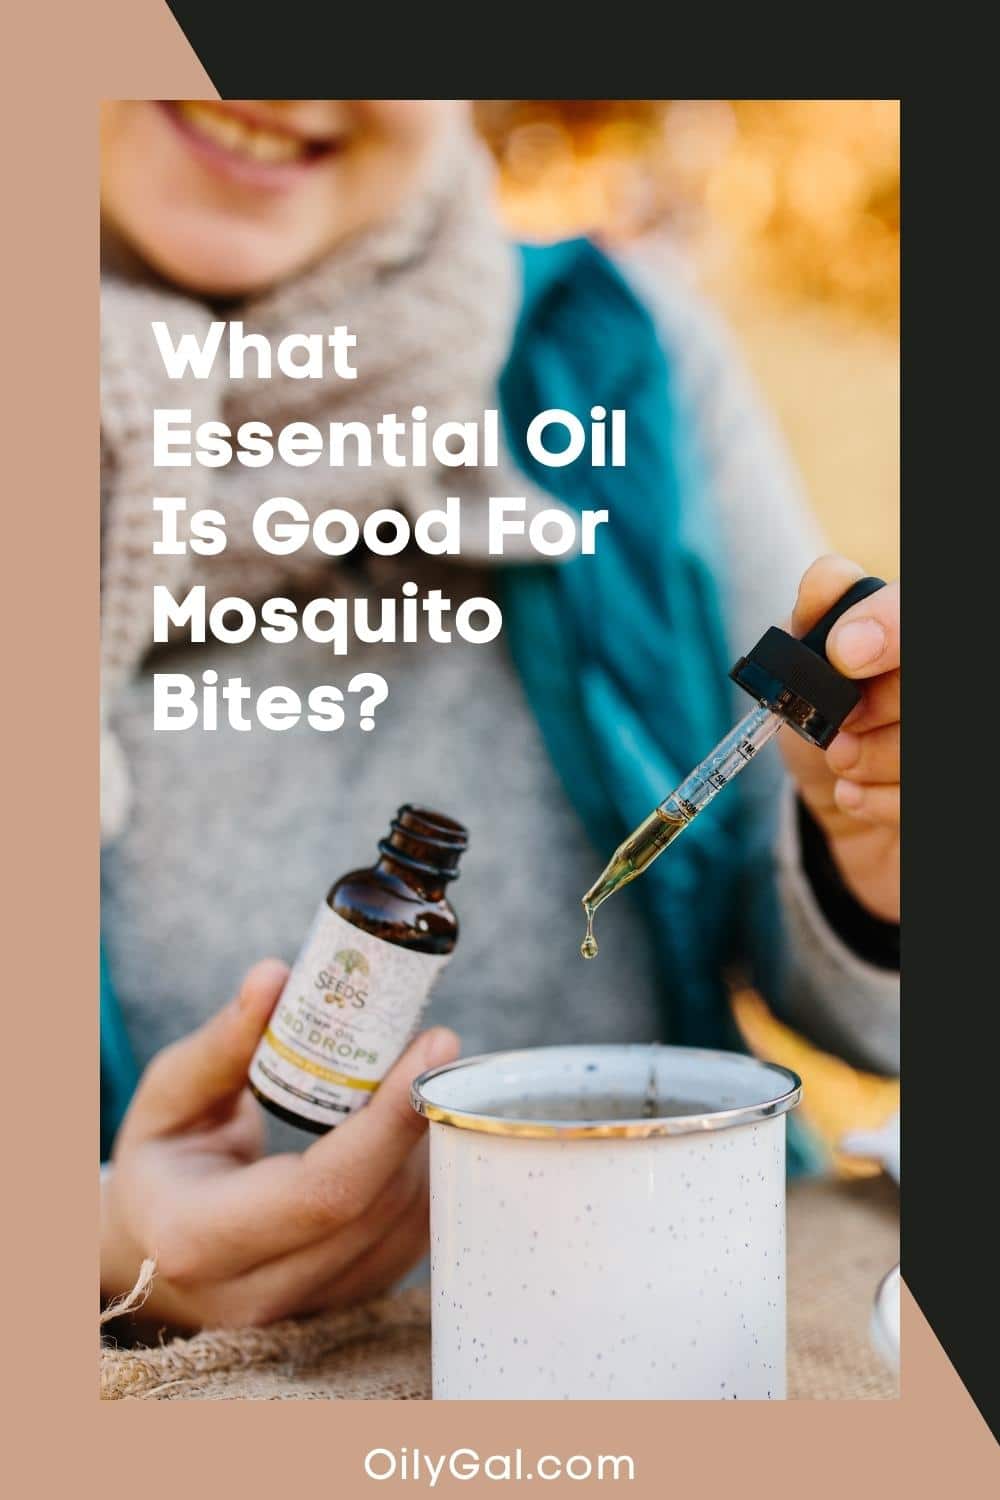 What essential oil is good for mosquito bites